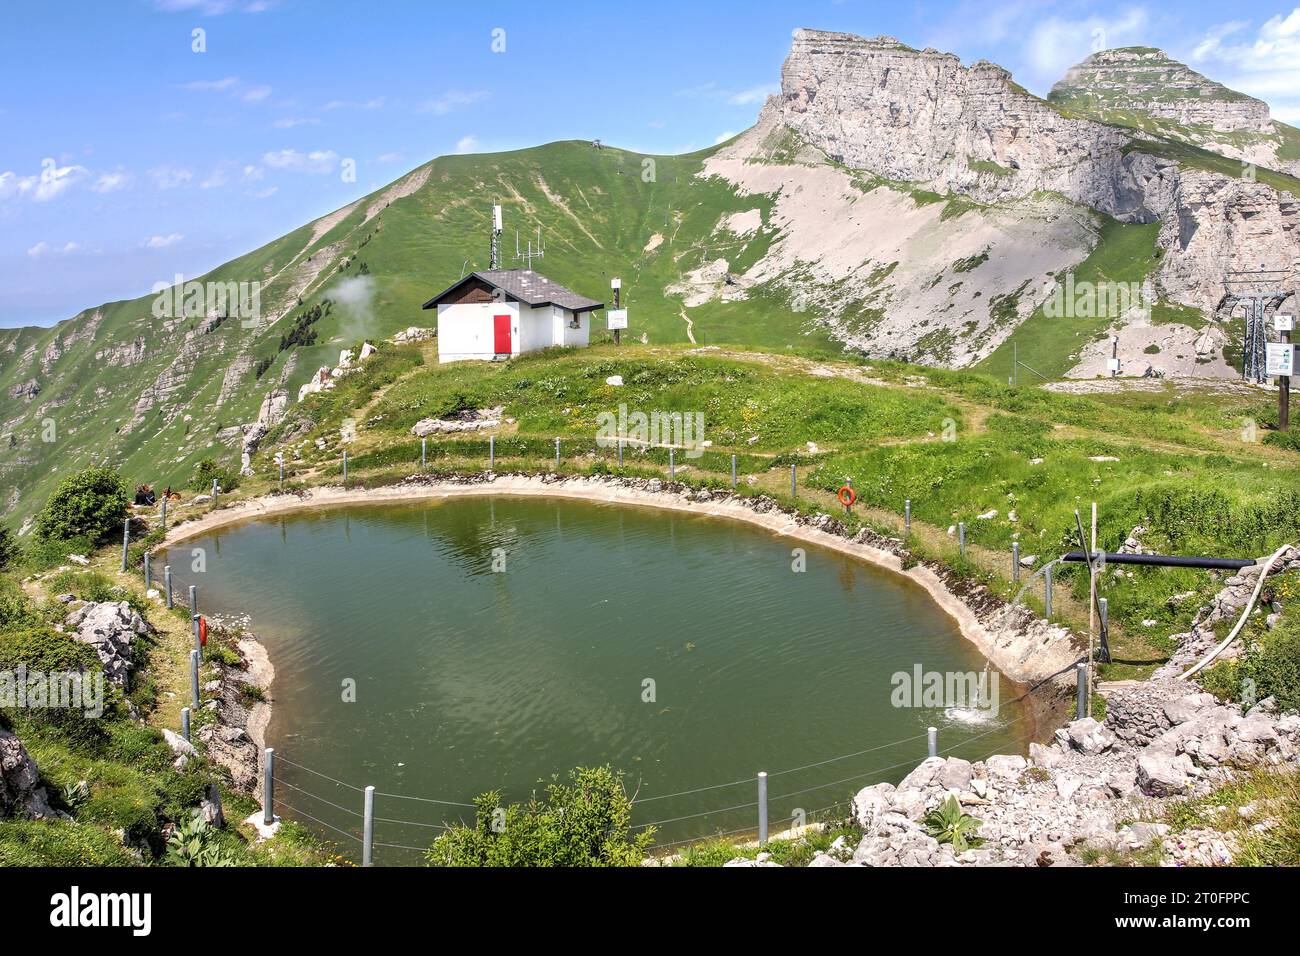 Beautiful view from Berneuse above the resort town of Leysin, Switzerland with a small lake and dramatic Tour d'Ai and Tour de Mayen, part of Vaud Alp Stock Photo